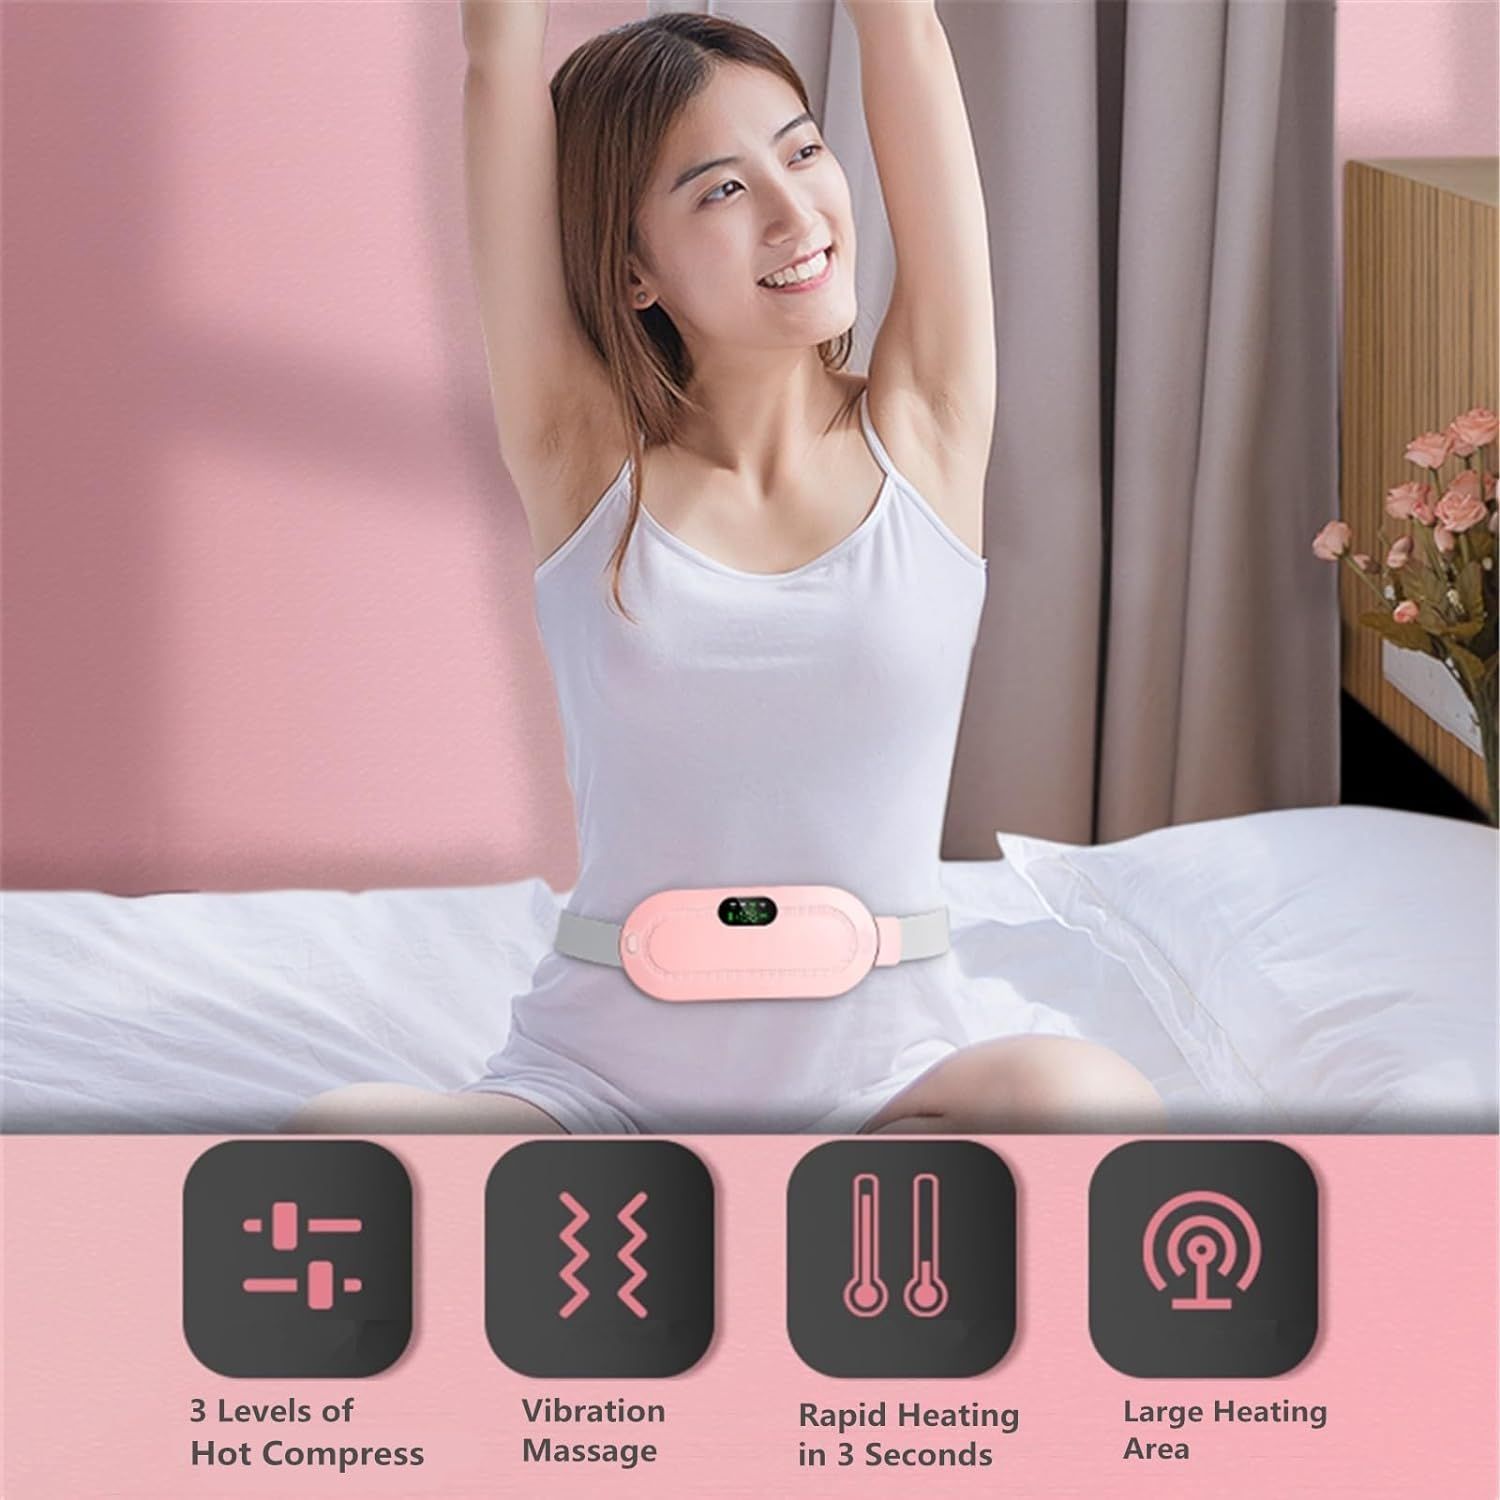 Shop Portable Heating Pad Cordless Electric Digital Display Waist Belt  Abdominal Massage Device with 3 Heat Levels and 4 Massage Modes for Back or  Belly Pain Relief Gift for Women (Pink) Online